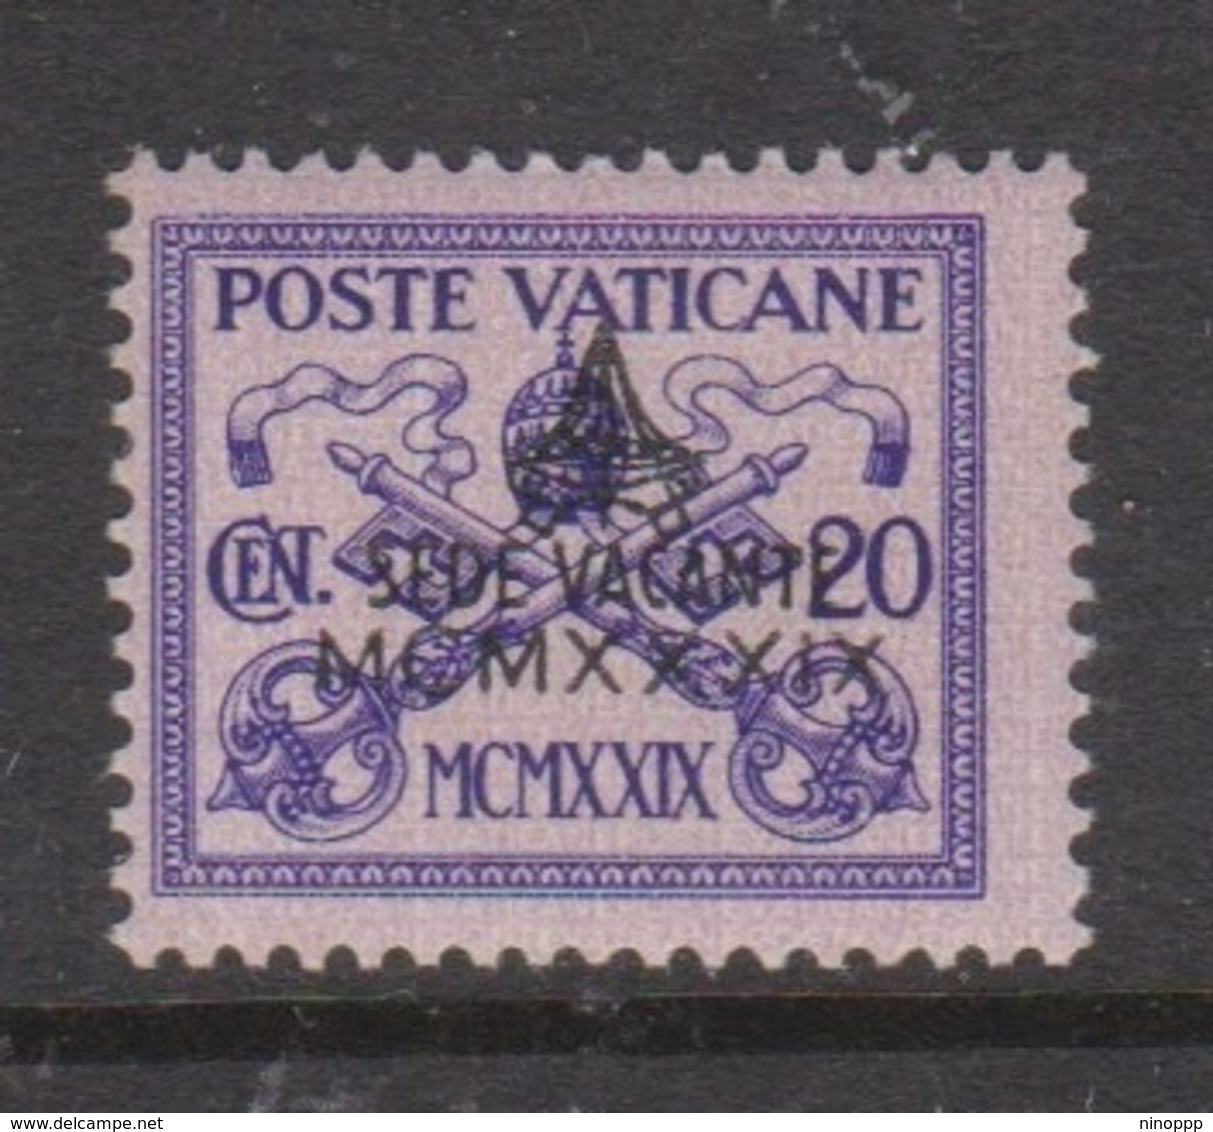 Vatican City S 63 1939 Vacant See,20c Violet On Lilac,mint Hinged - Used Stamps